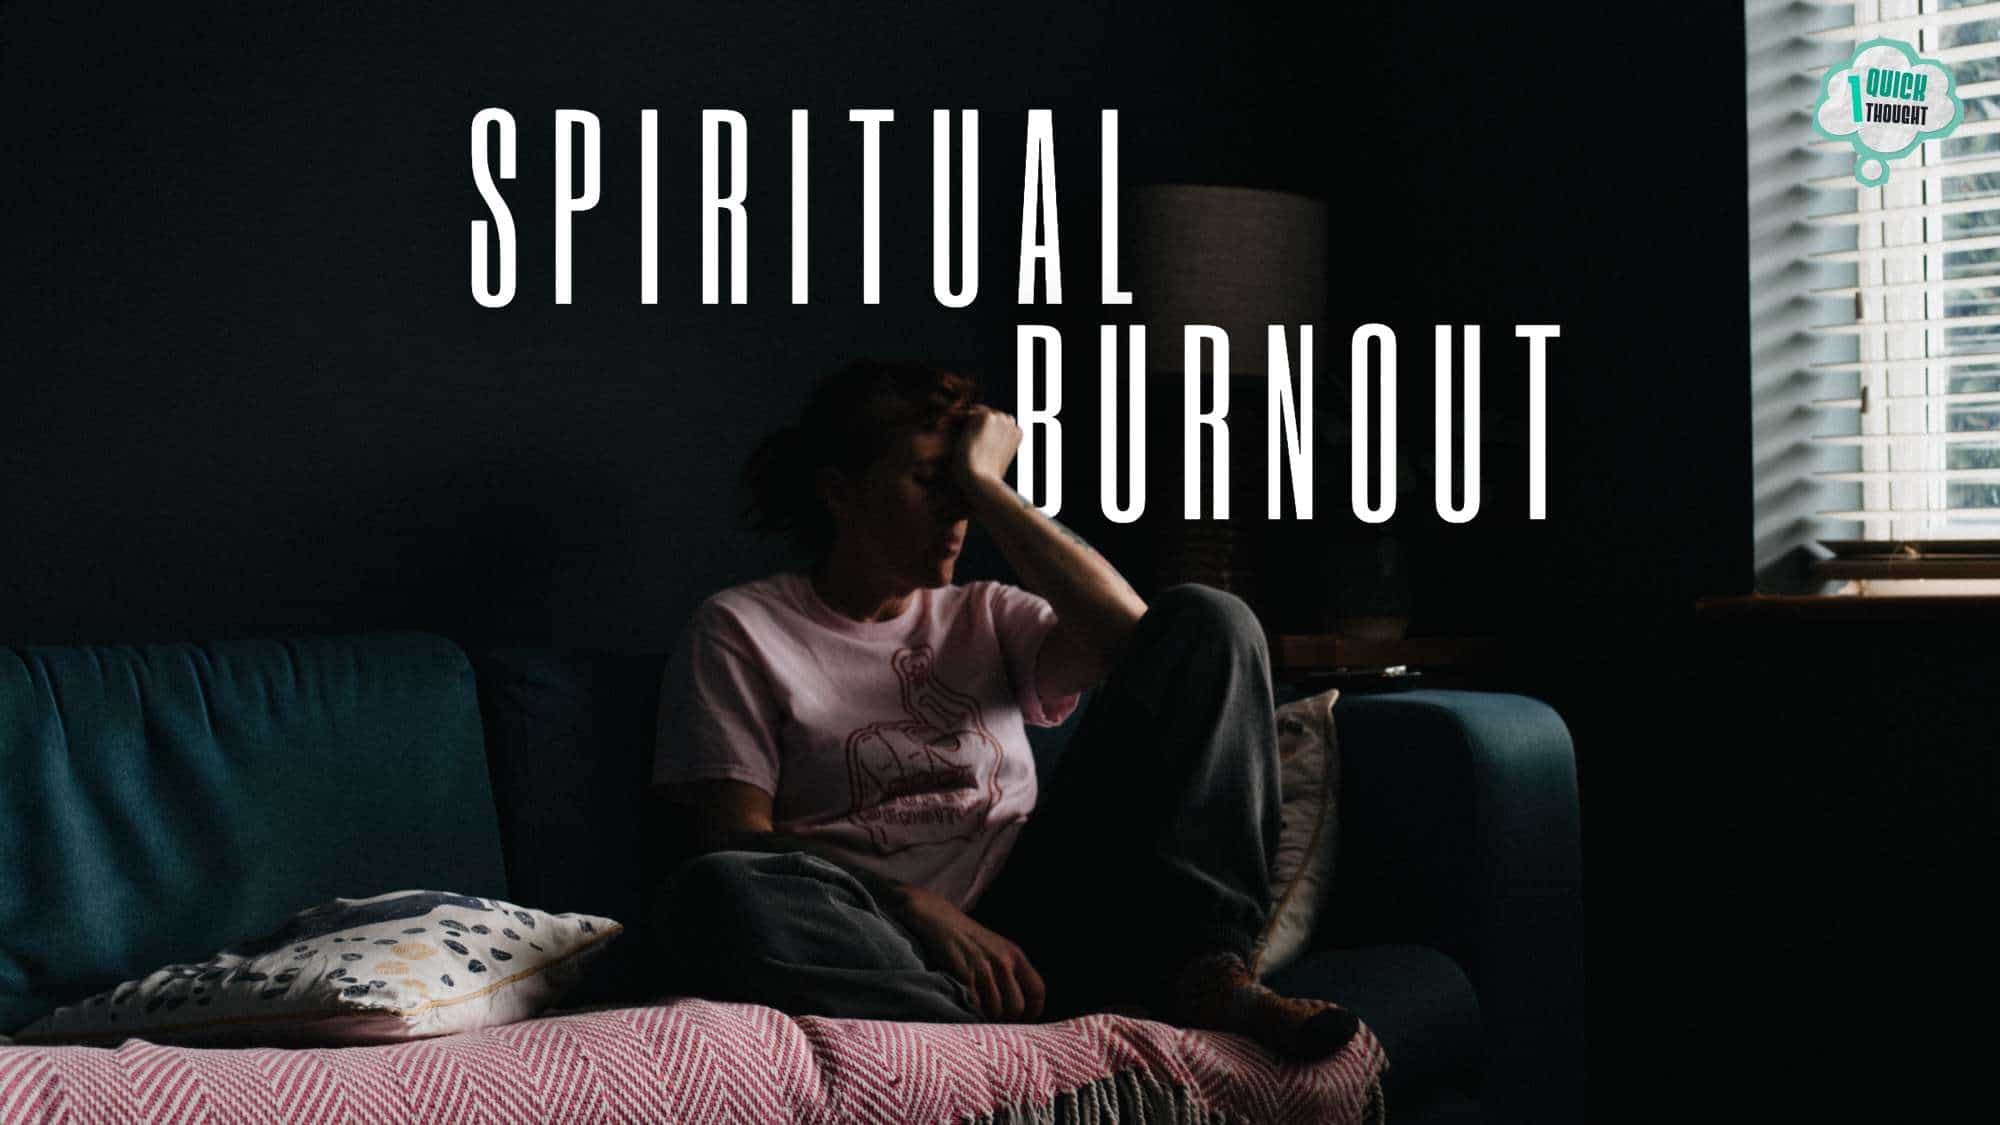 One Quick Thought: How to Get Out of a Spiritual Burnout 19